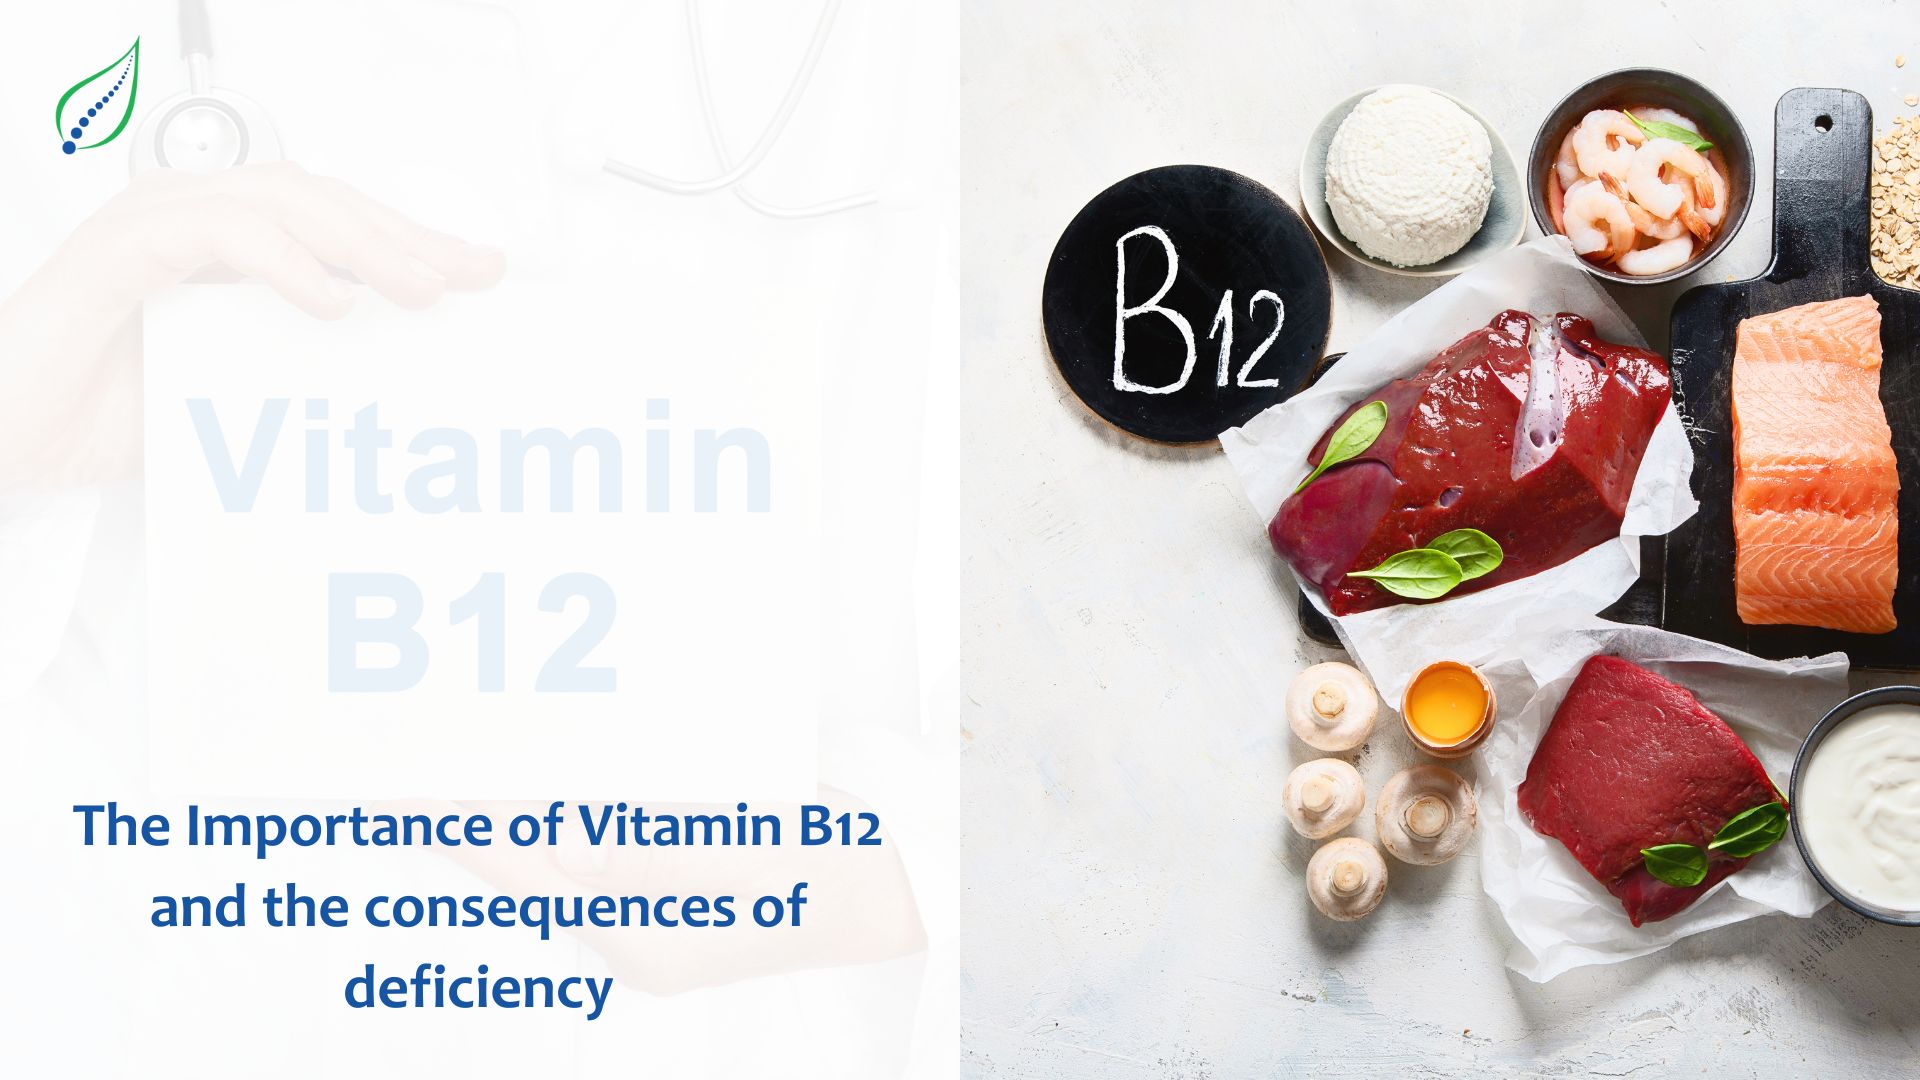 The Importance of Vitamin B12 and the Consequences of Deficiency